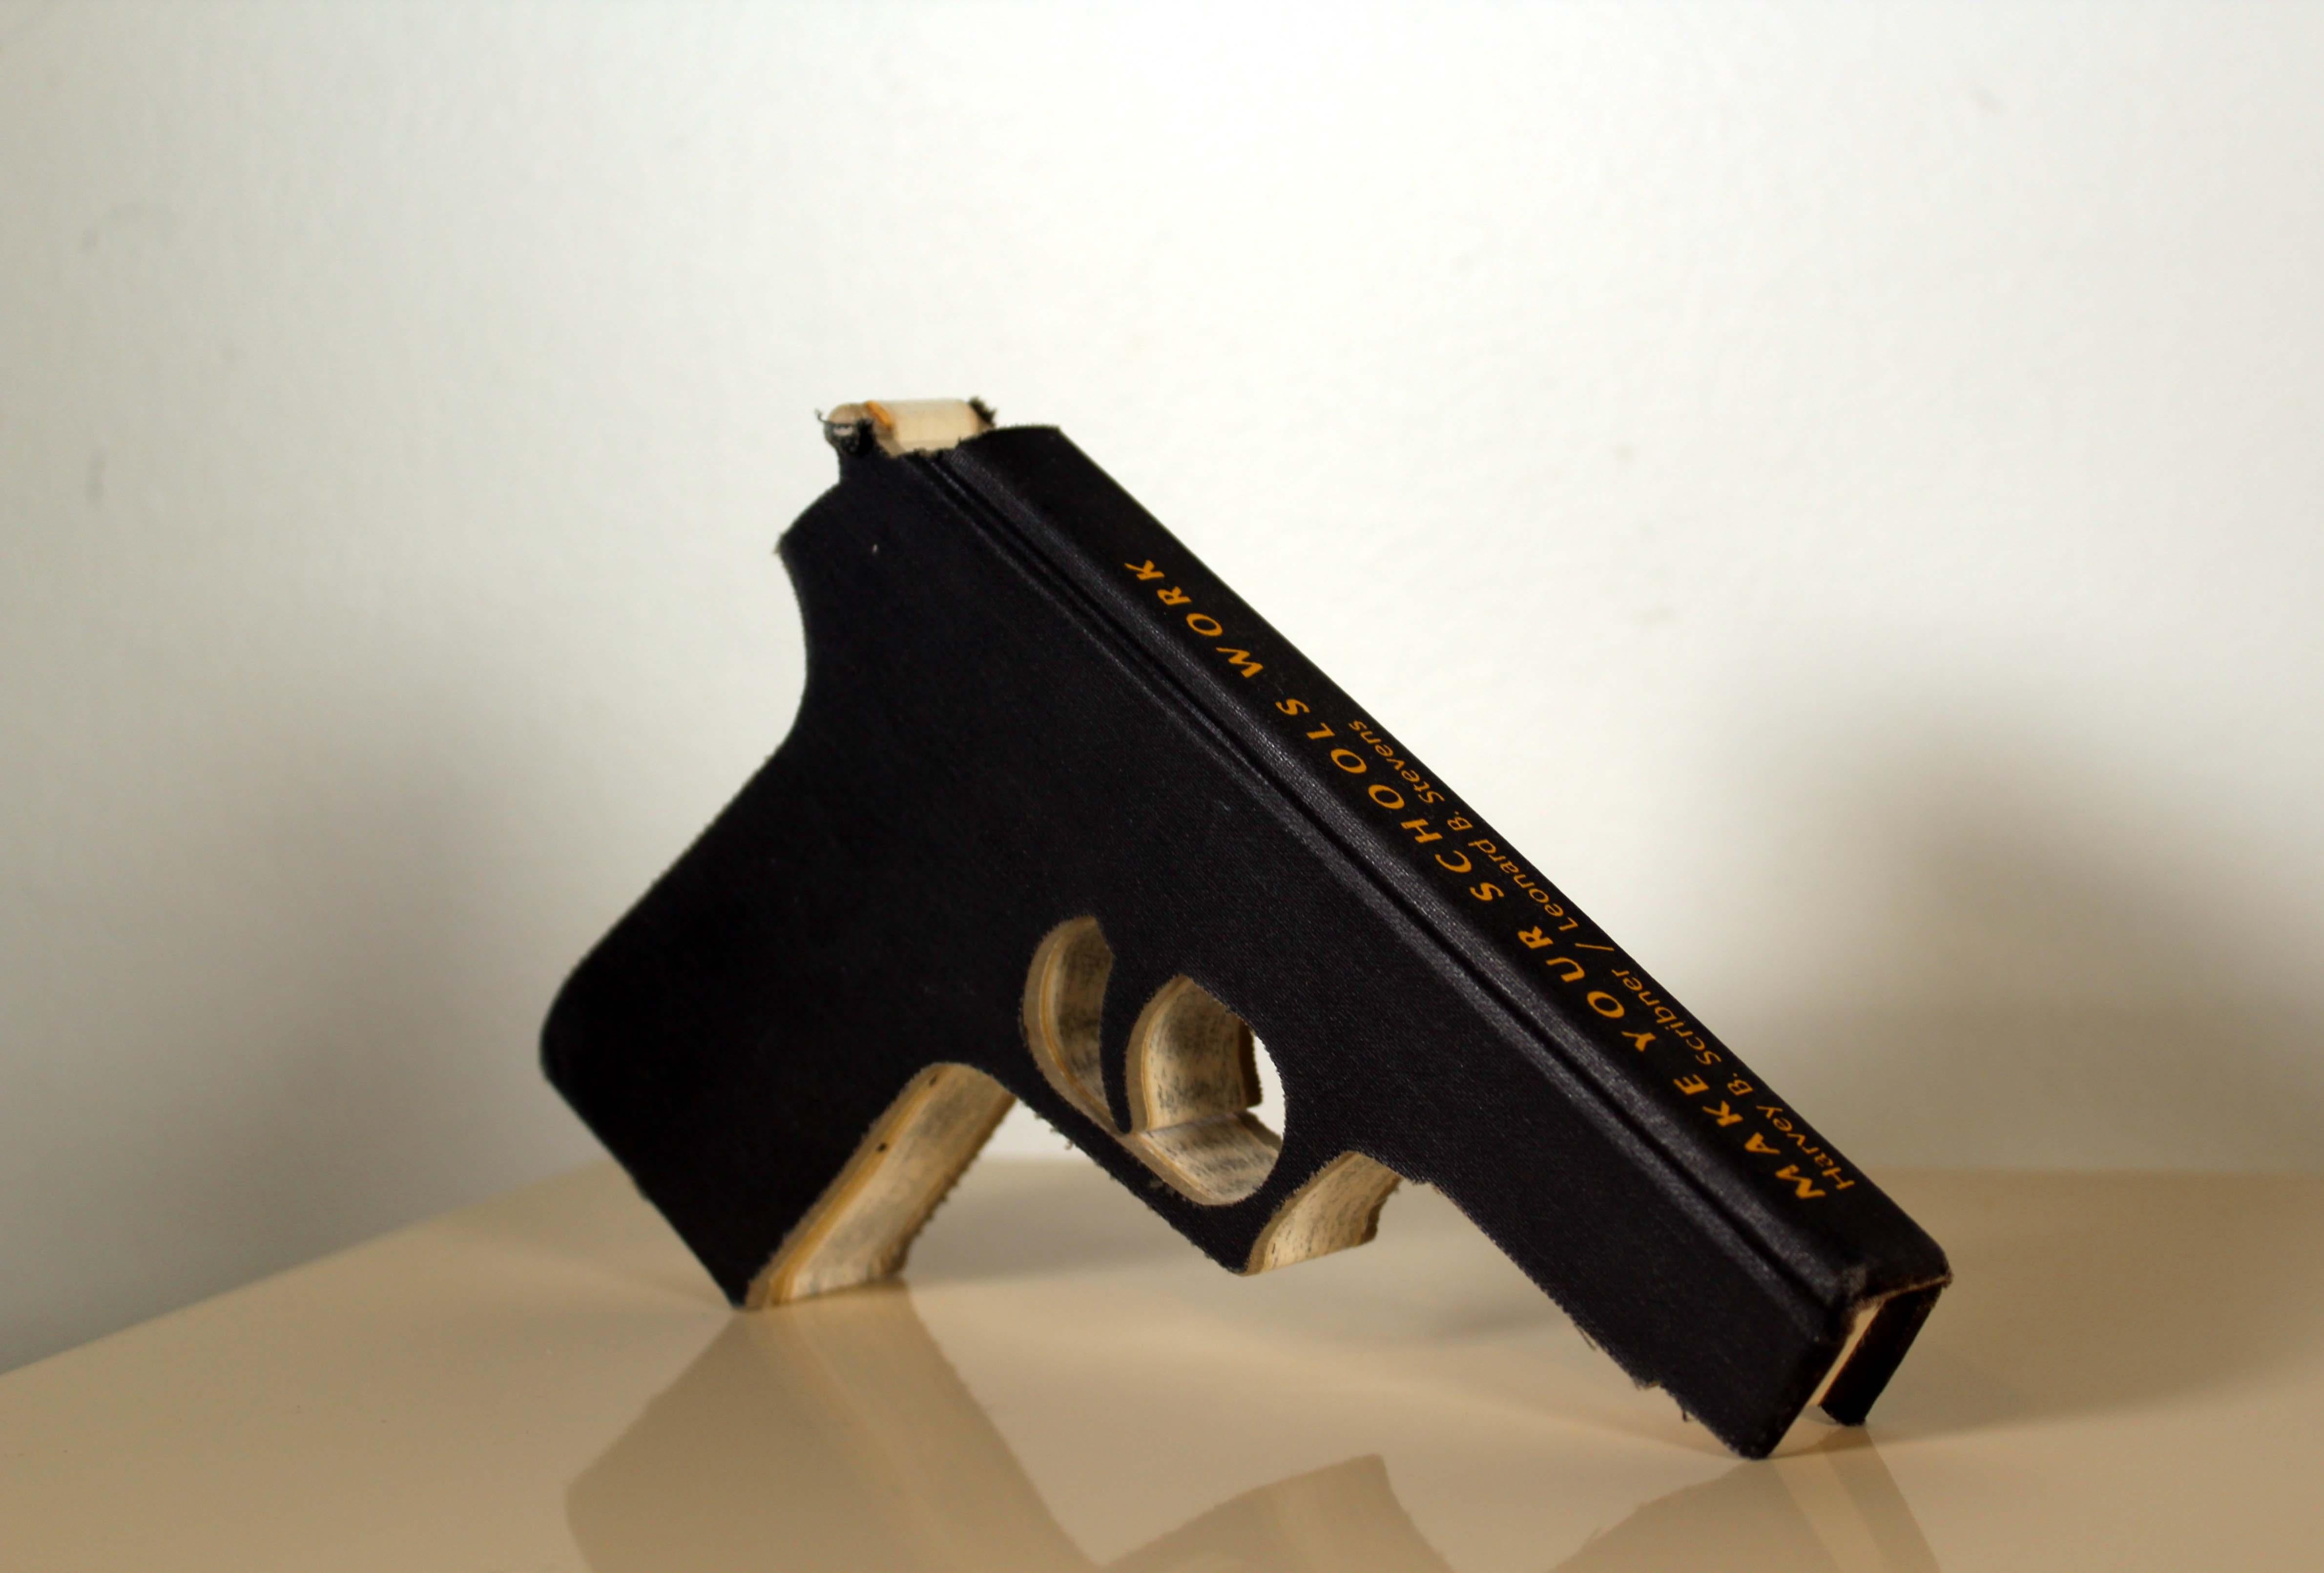 An imaginative hand cut book sculpture in the shape of the gun by California based artist Robert The. Hand signed in ink by artist with a 1996 date. Robert The is known for making sculptures from books, often culled from dumpsters and thrift store